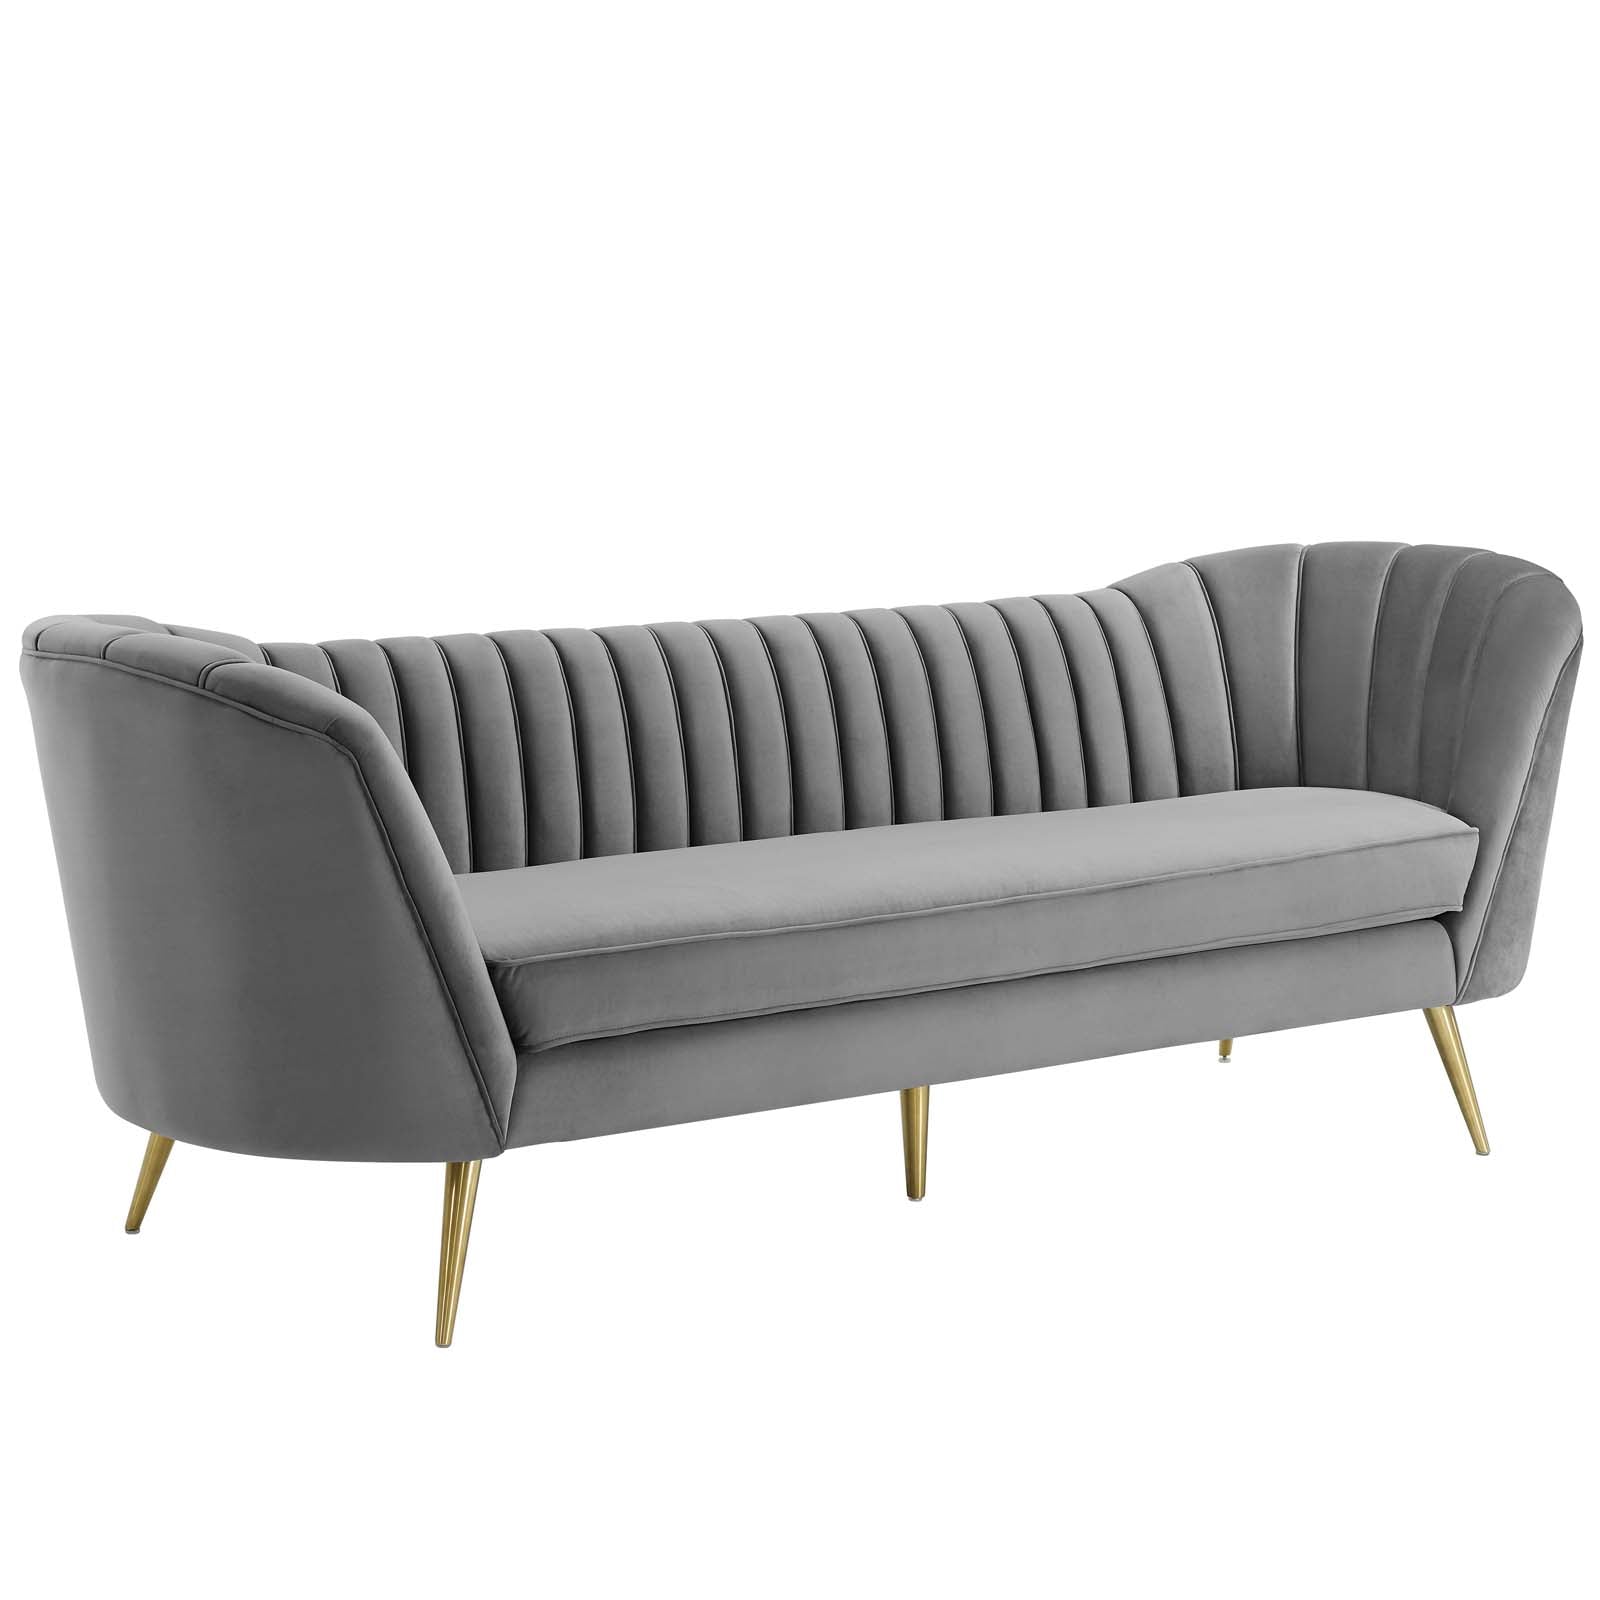 velvet sofa hire Perth <a href='#' class='view-taggged-products' data-id=7400>Click to View Products</a><div class='taggged-products-slider-wrap'><div class='heading-tag-products'></div><div class='taggged-products-slider'></div></div><div class='loading-spinner'><i class='fa fa-spinner fa-spin'></i></div>